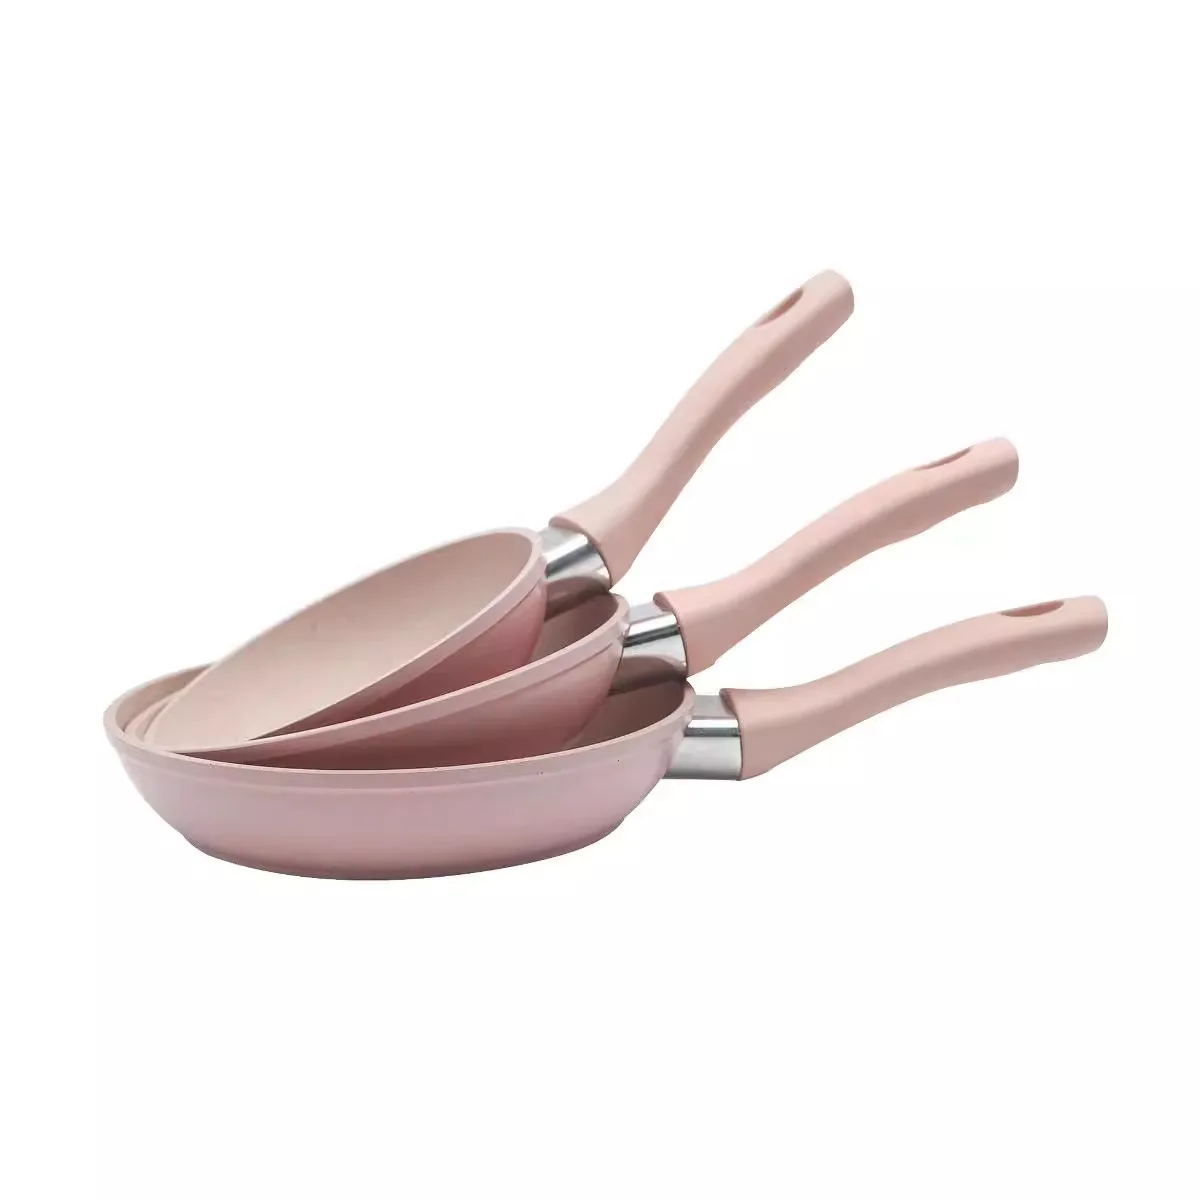 Sell well egg omelette pan mini 12/14/16cm non stick fry pan marble coating flat fry forged aluminum alloy nonstick frying pan